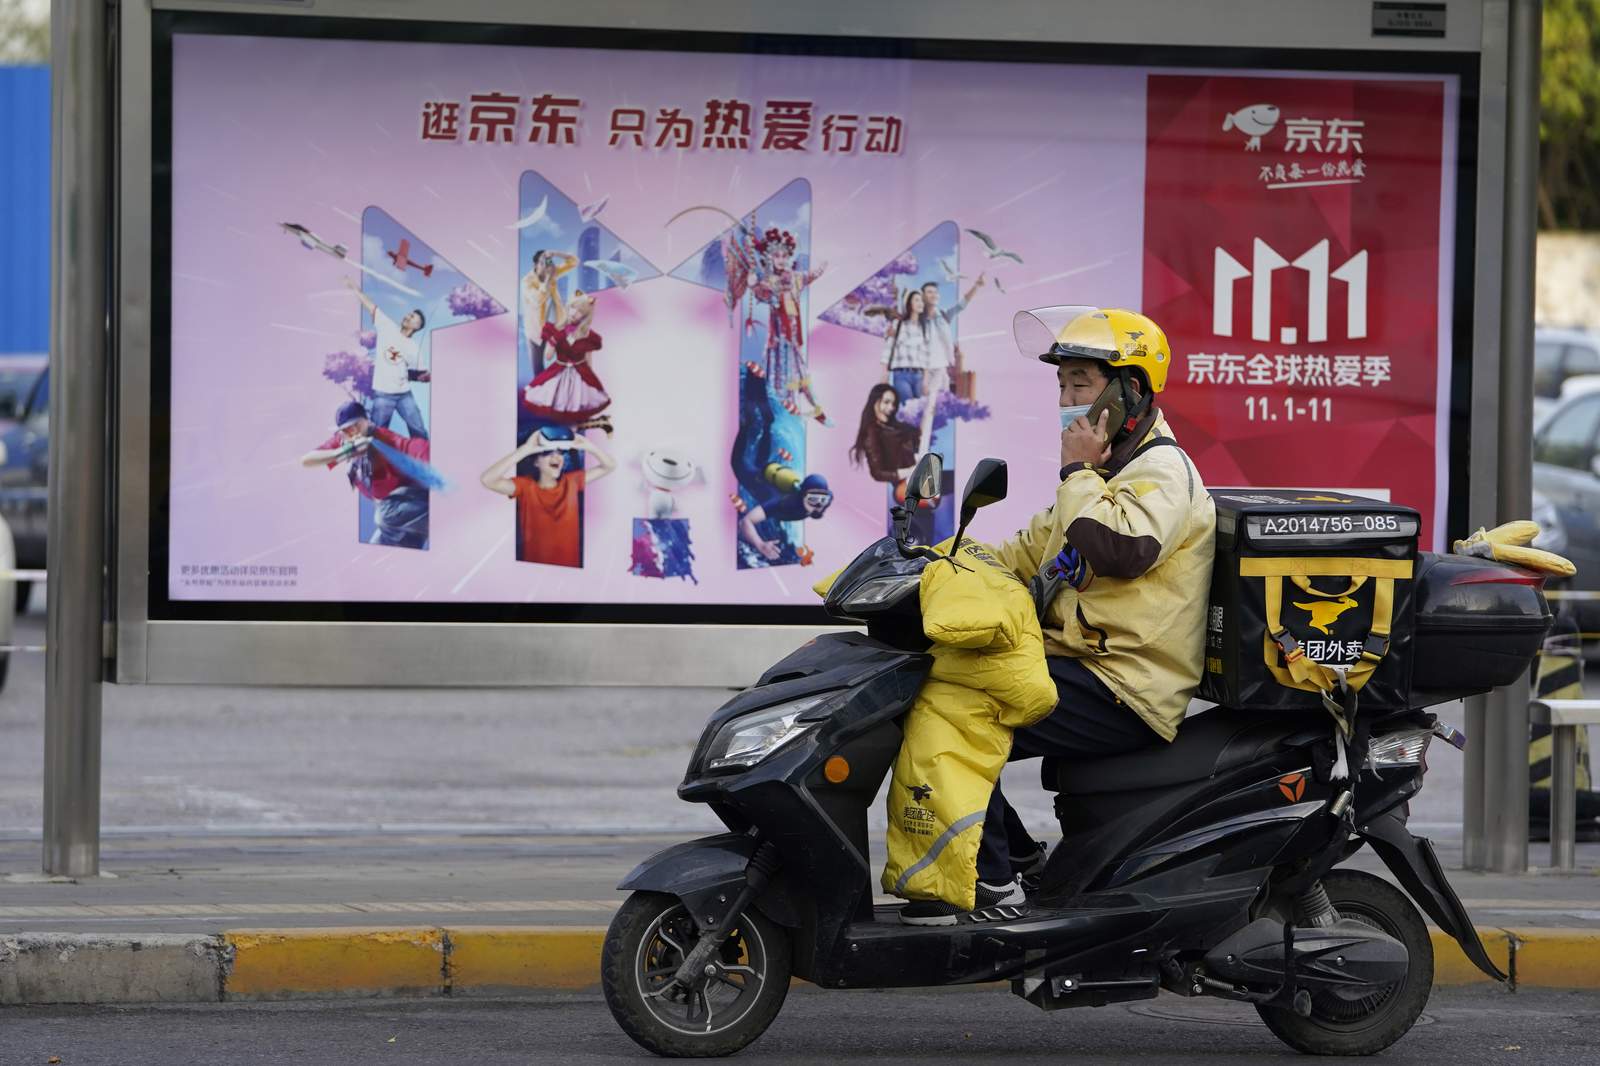 China gears up for world's largest online shopping festival